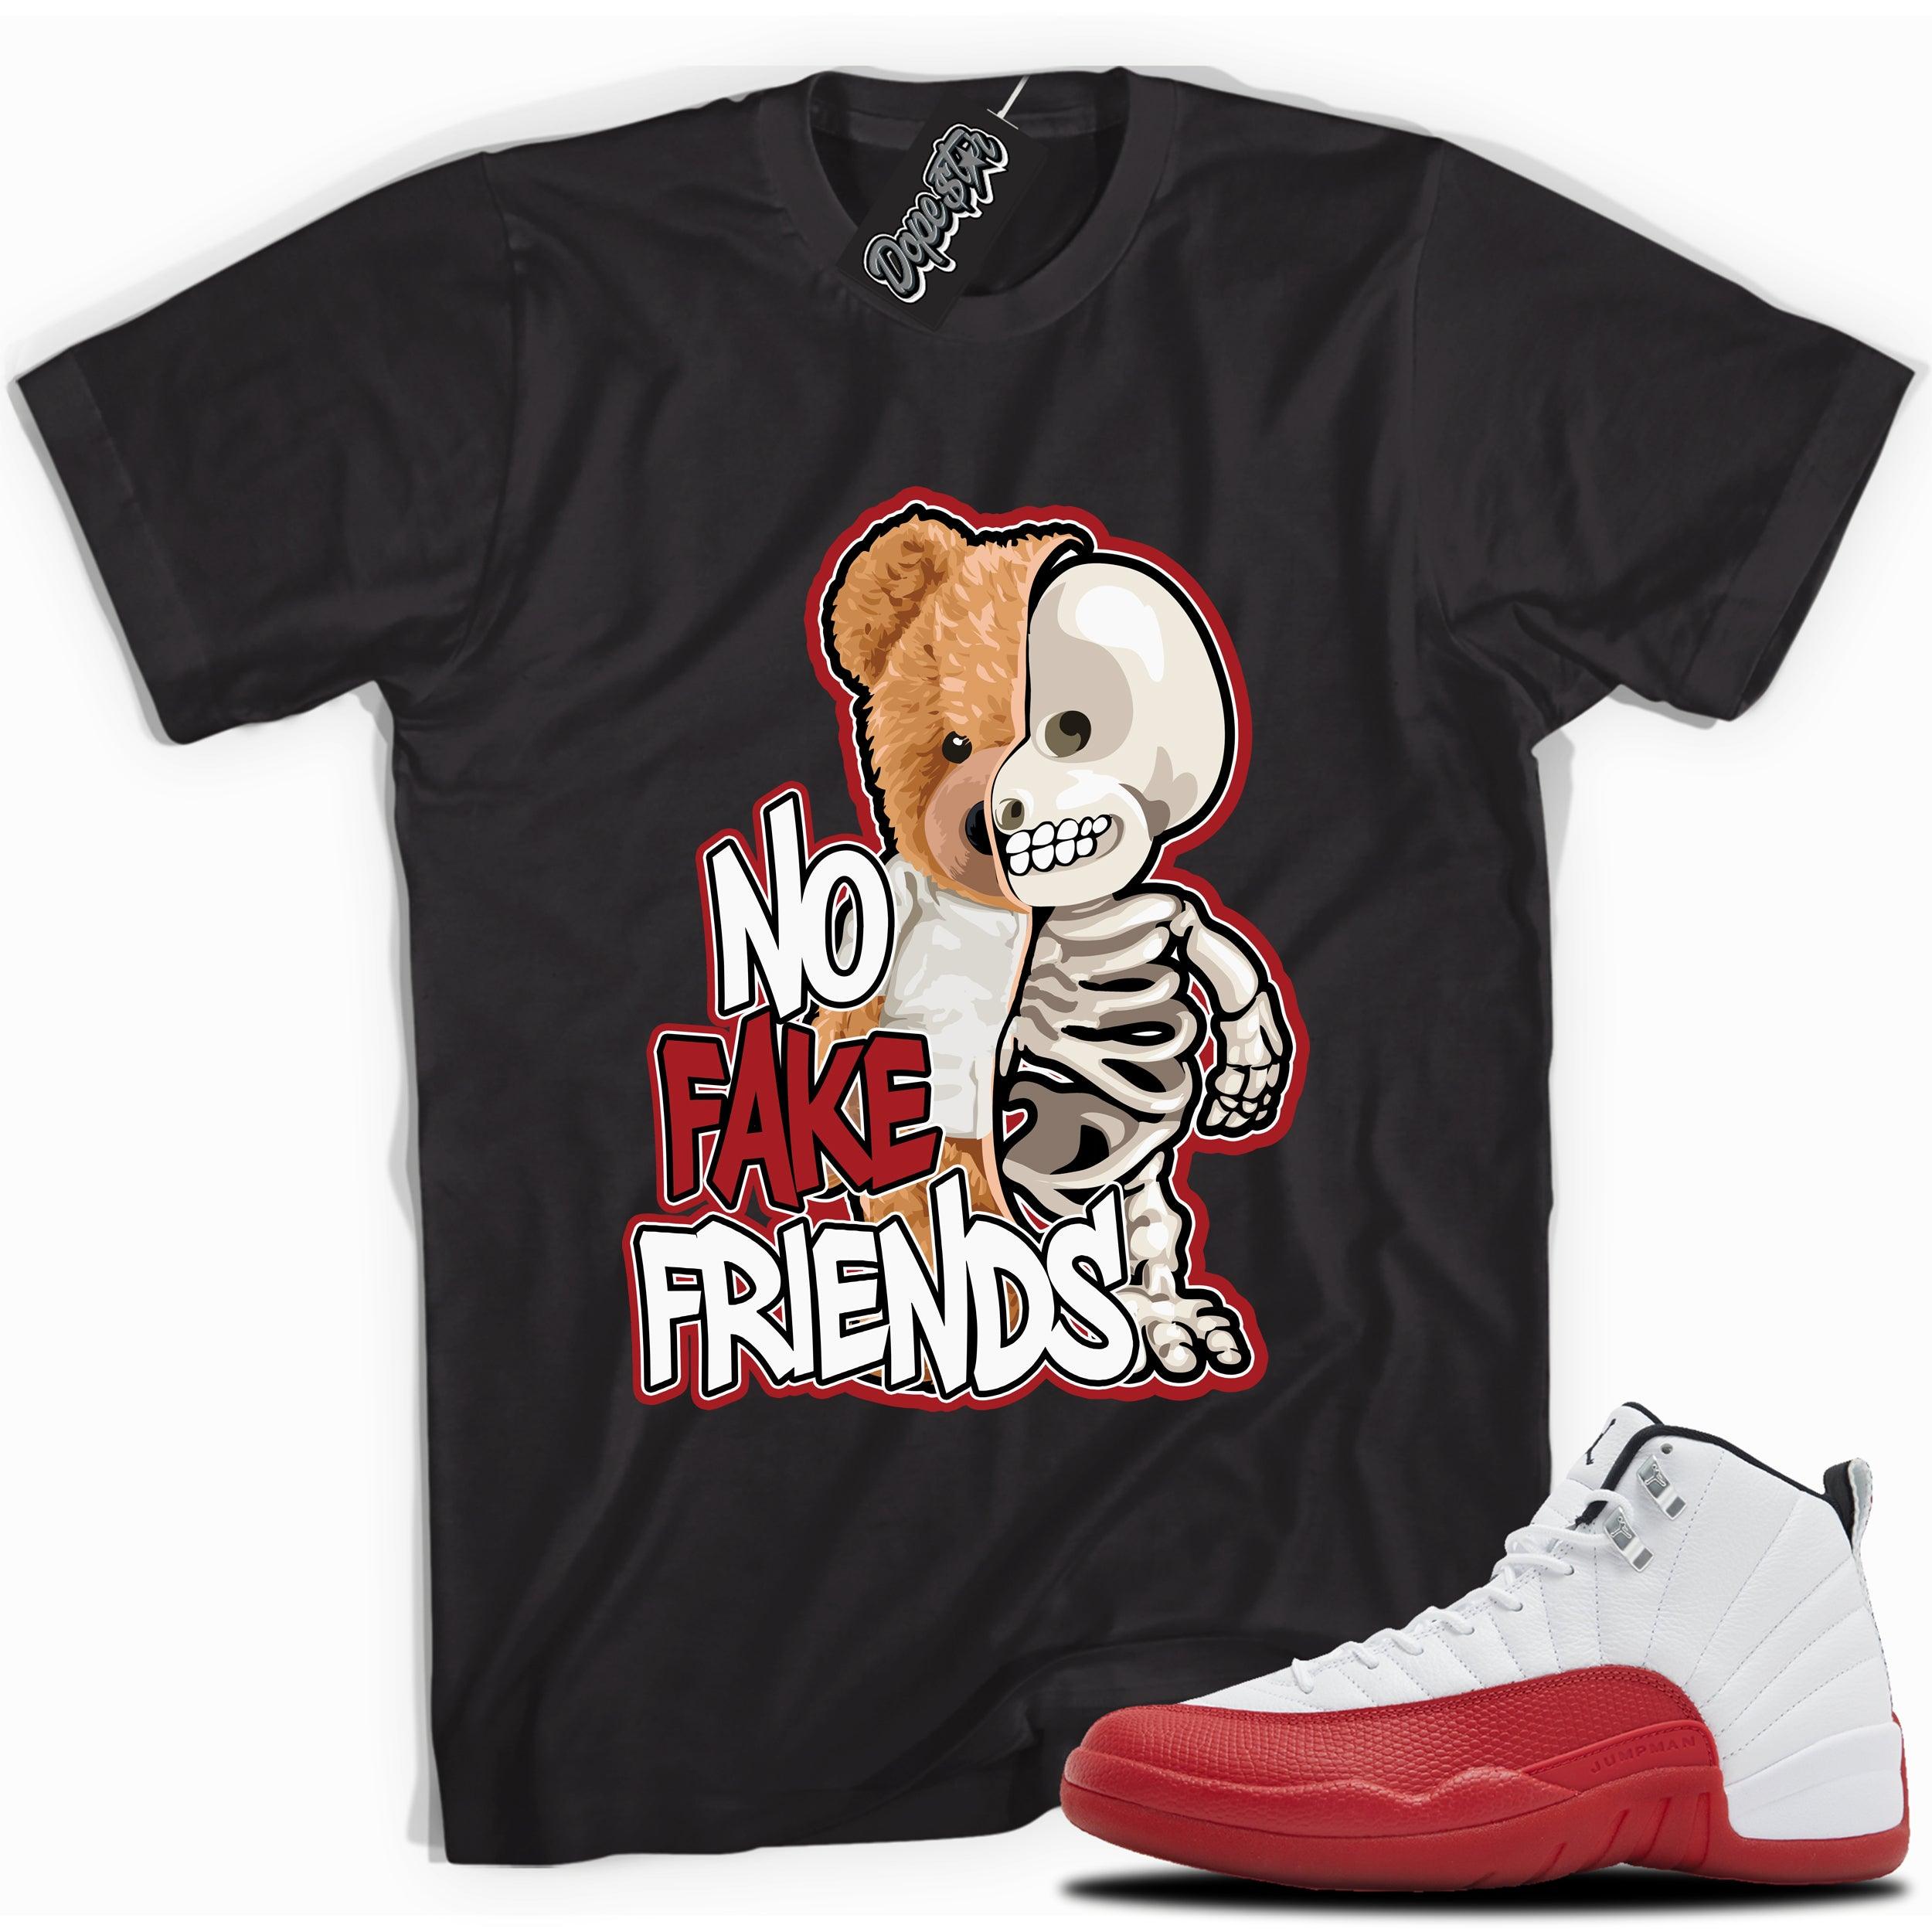 Cool Black graphic tee with “NO FAKE FRIENDS” print, that perfectly matches Air Jordan 12 Retro Cherry Red 2023 red and white sneakers 